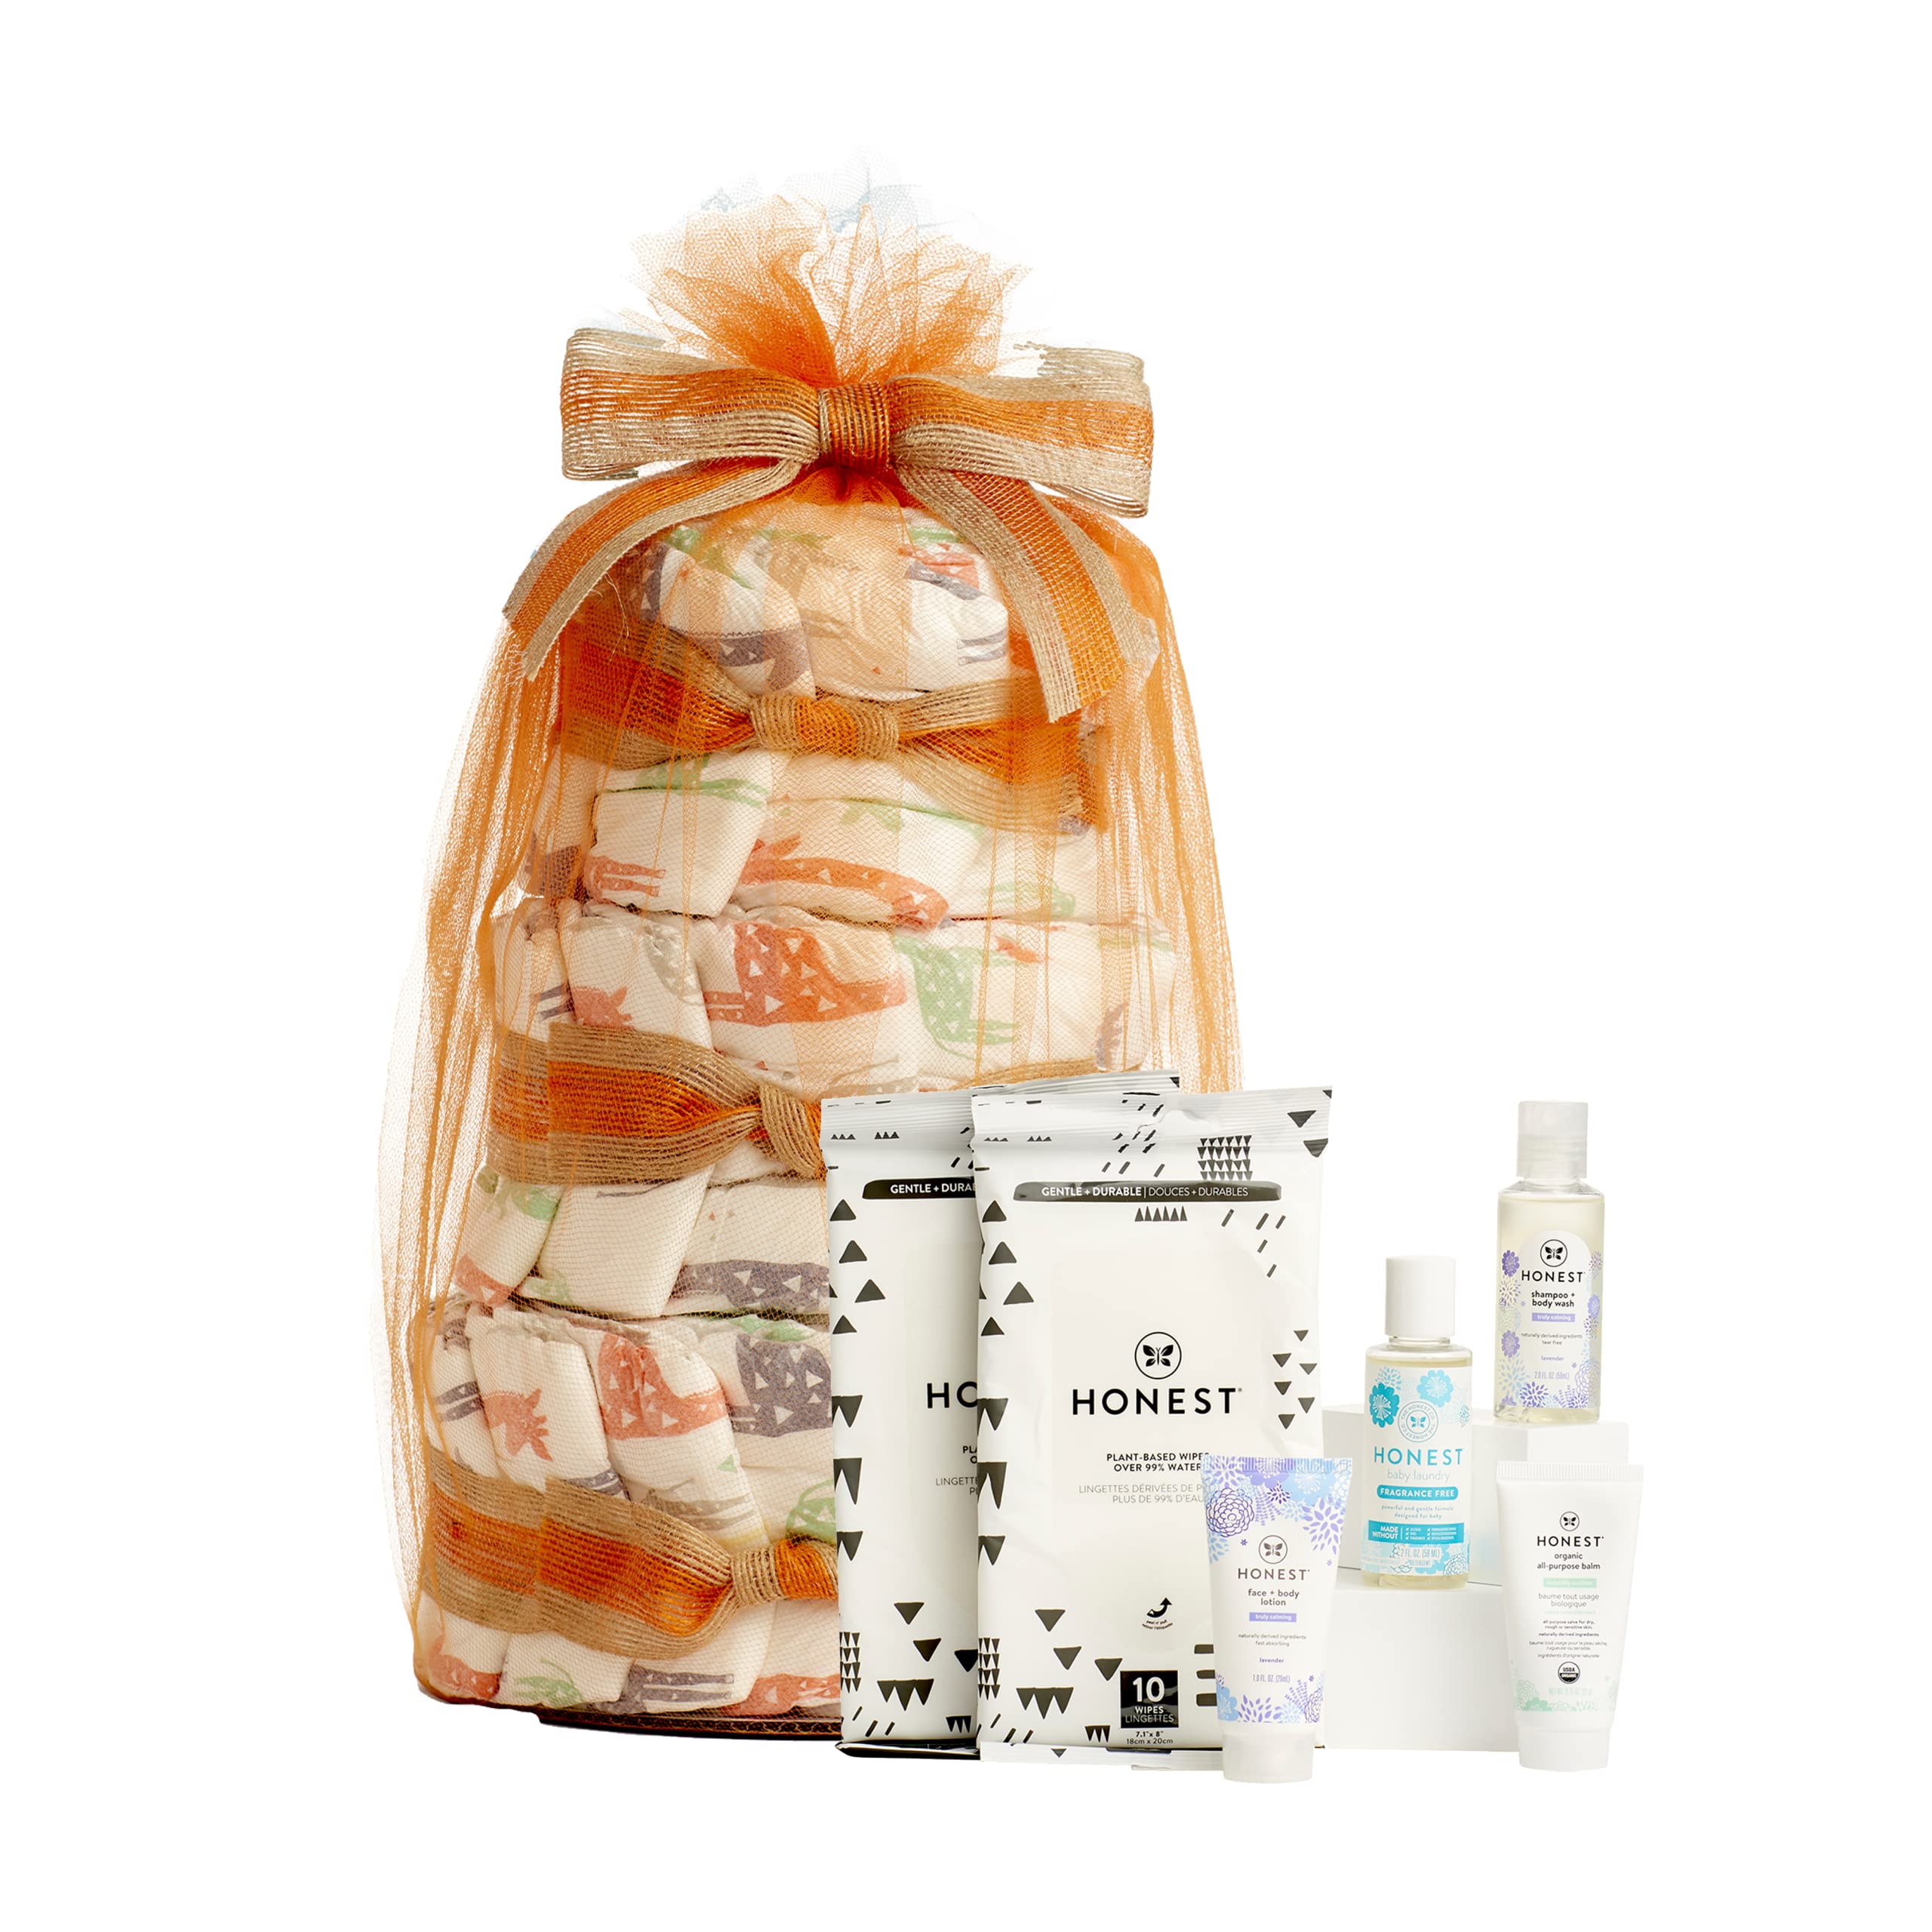 The Honest Company Diaper Cake | Clean Conscious Diapers, Baby Personal Care, Plant-Based Wipes | Giraffes | Regular, Size 1 (8-14 lbs), 35 Count